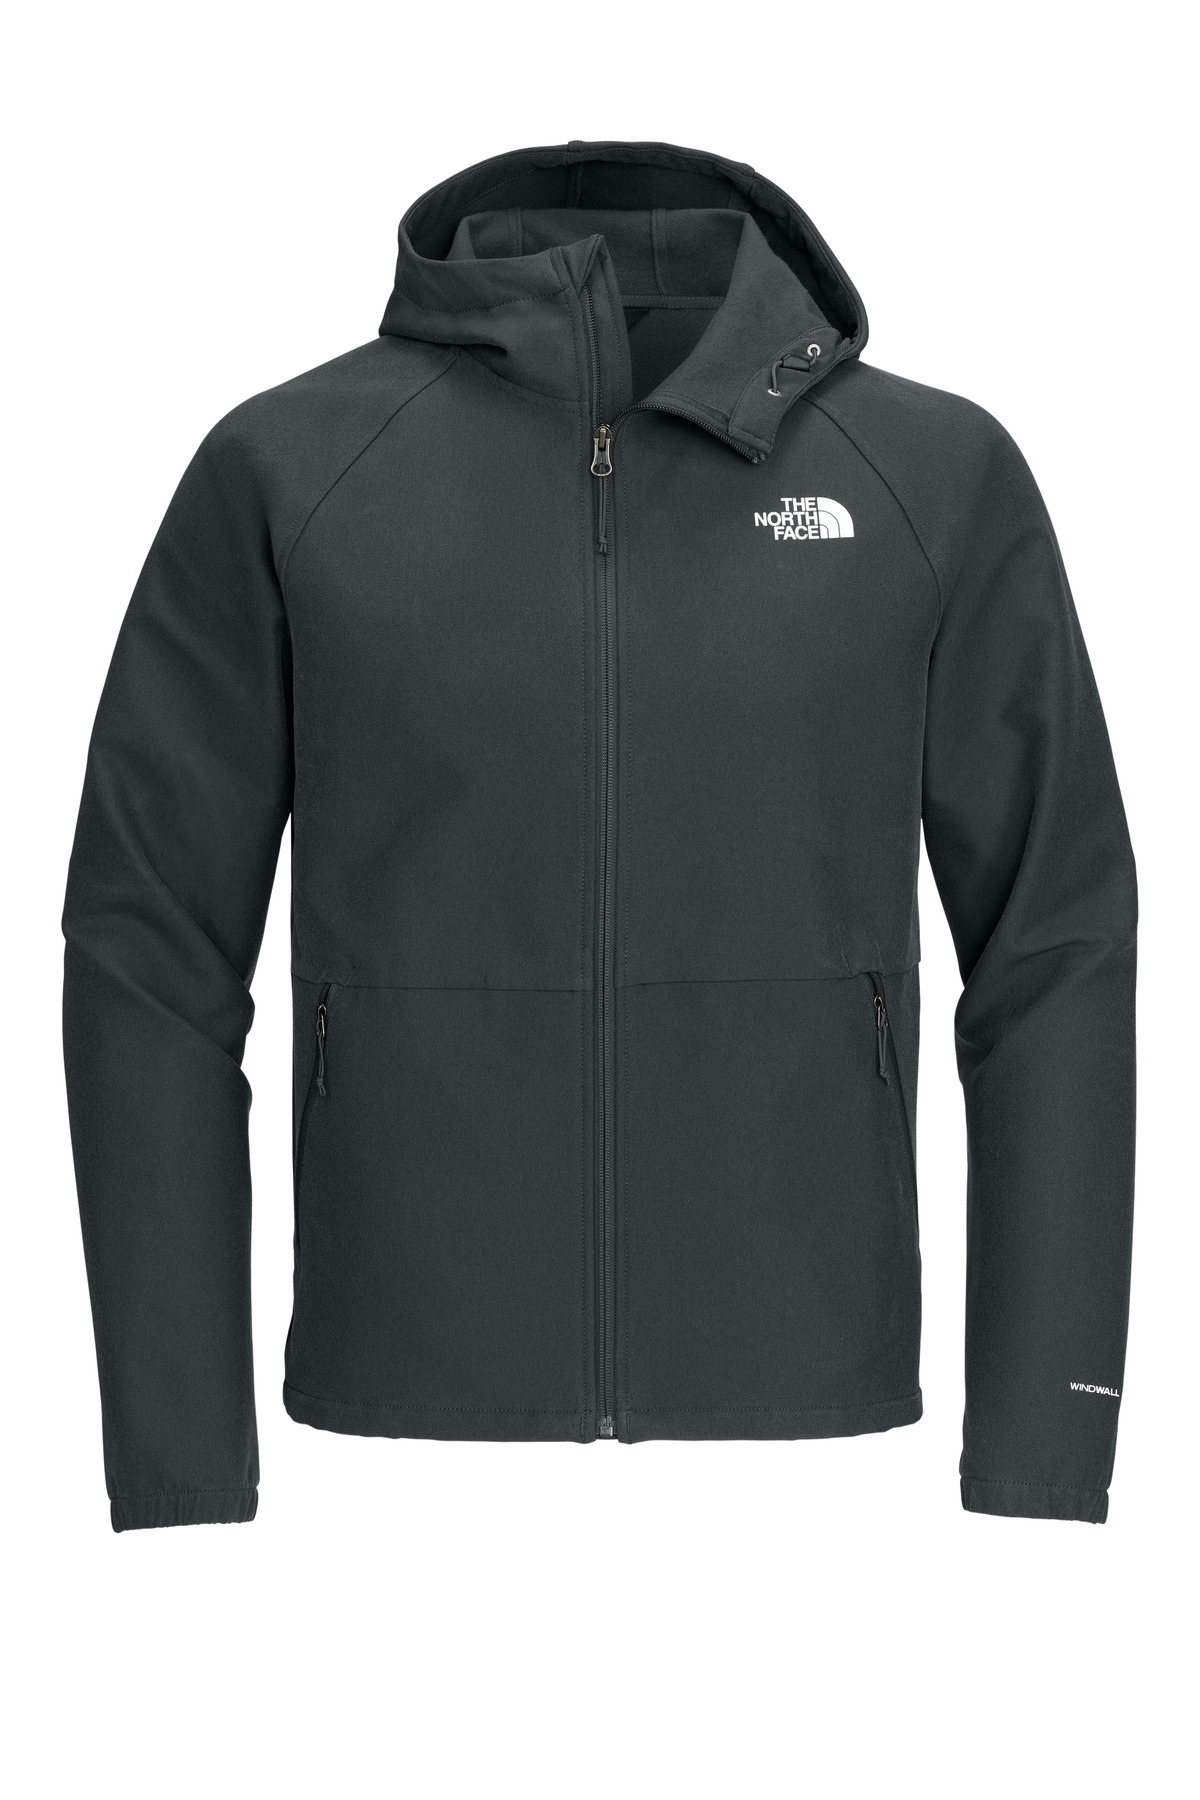 The North Face Barr Lake Hooded Soft Shell Jacket-The North Face